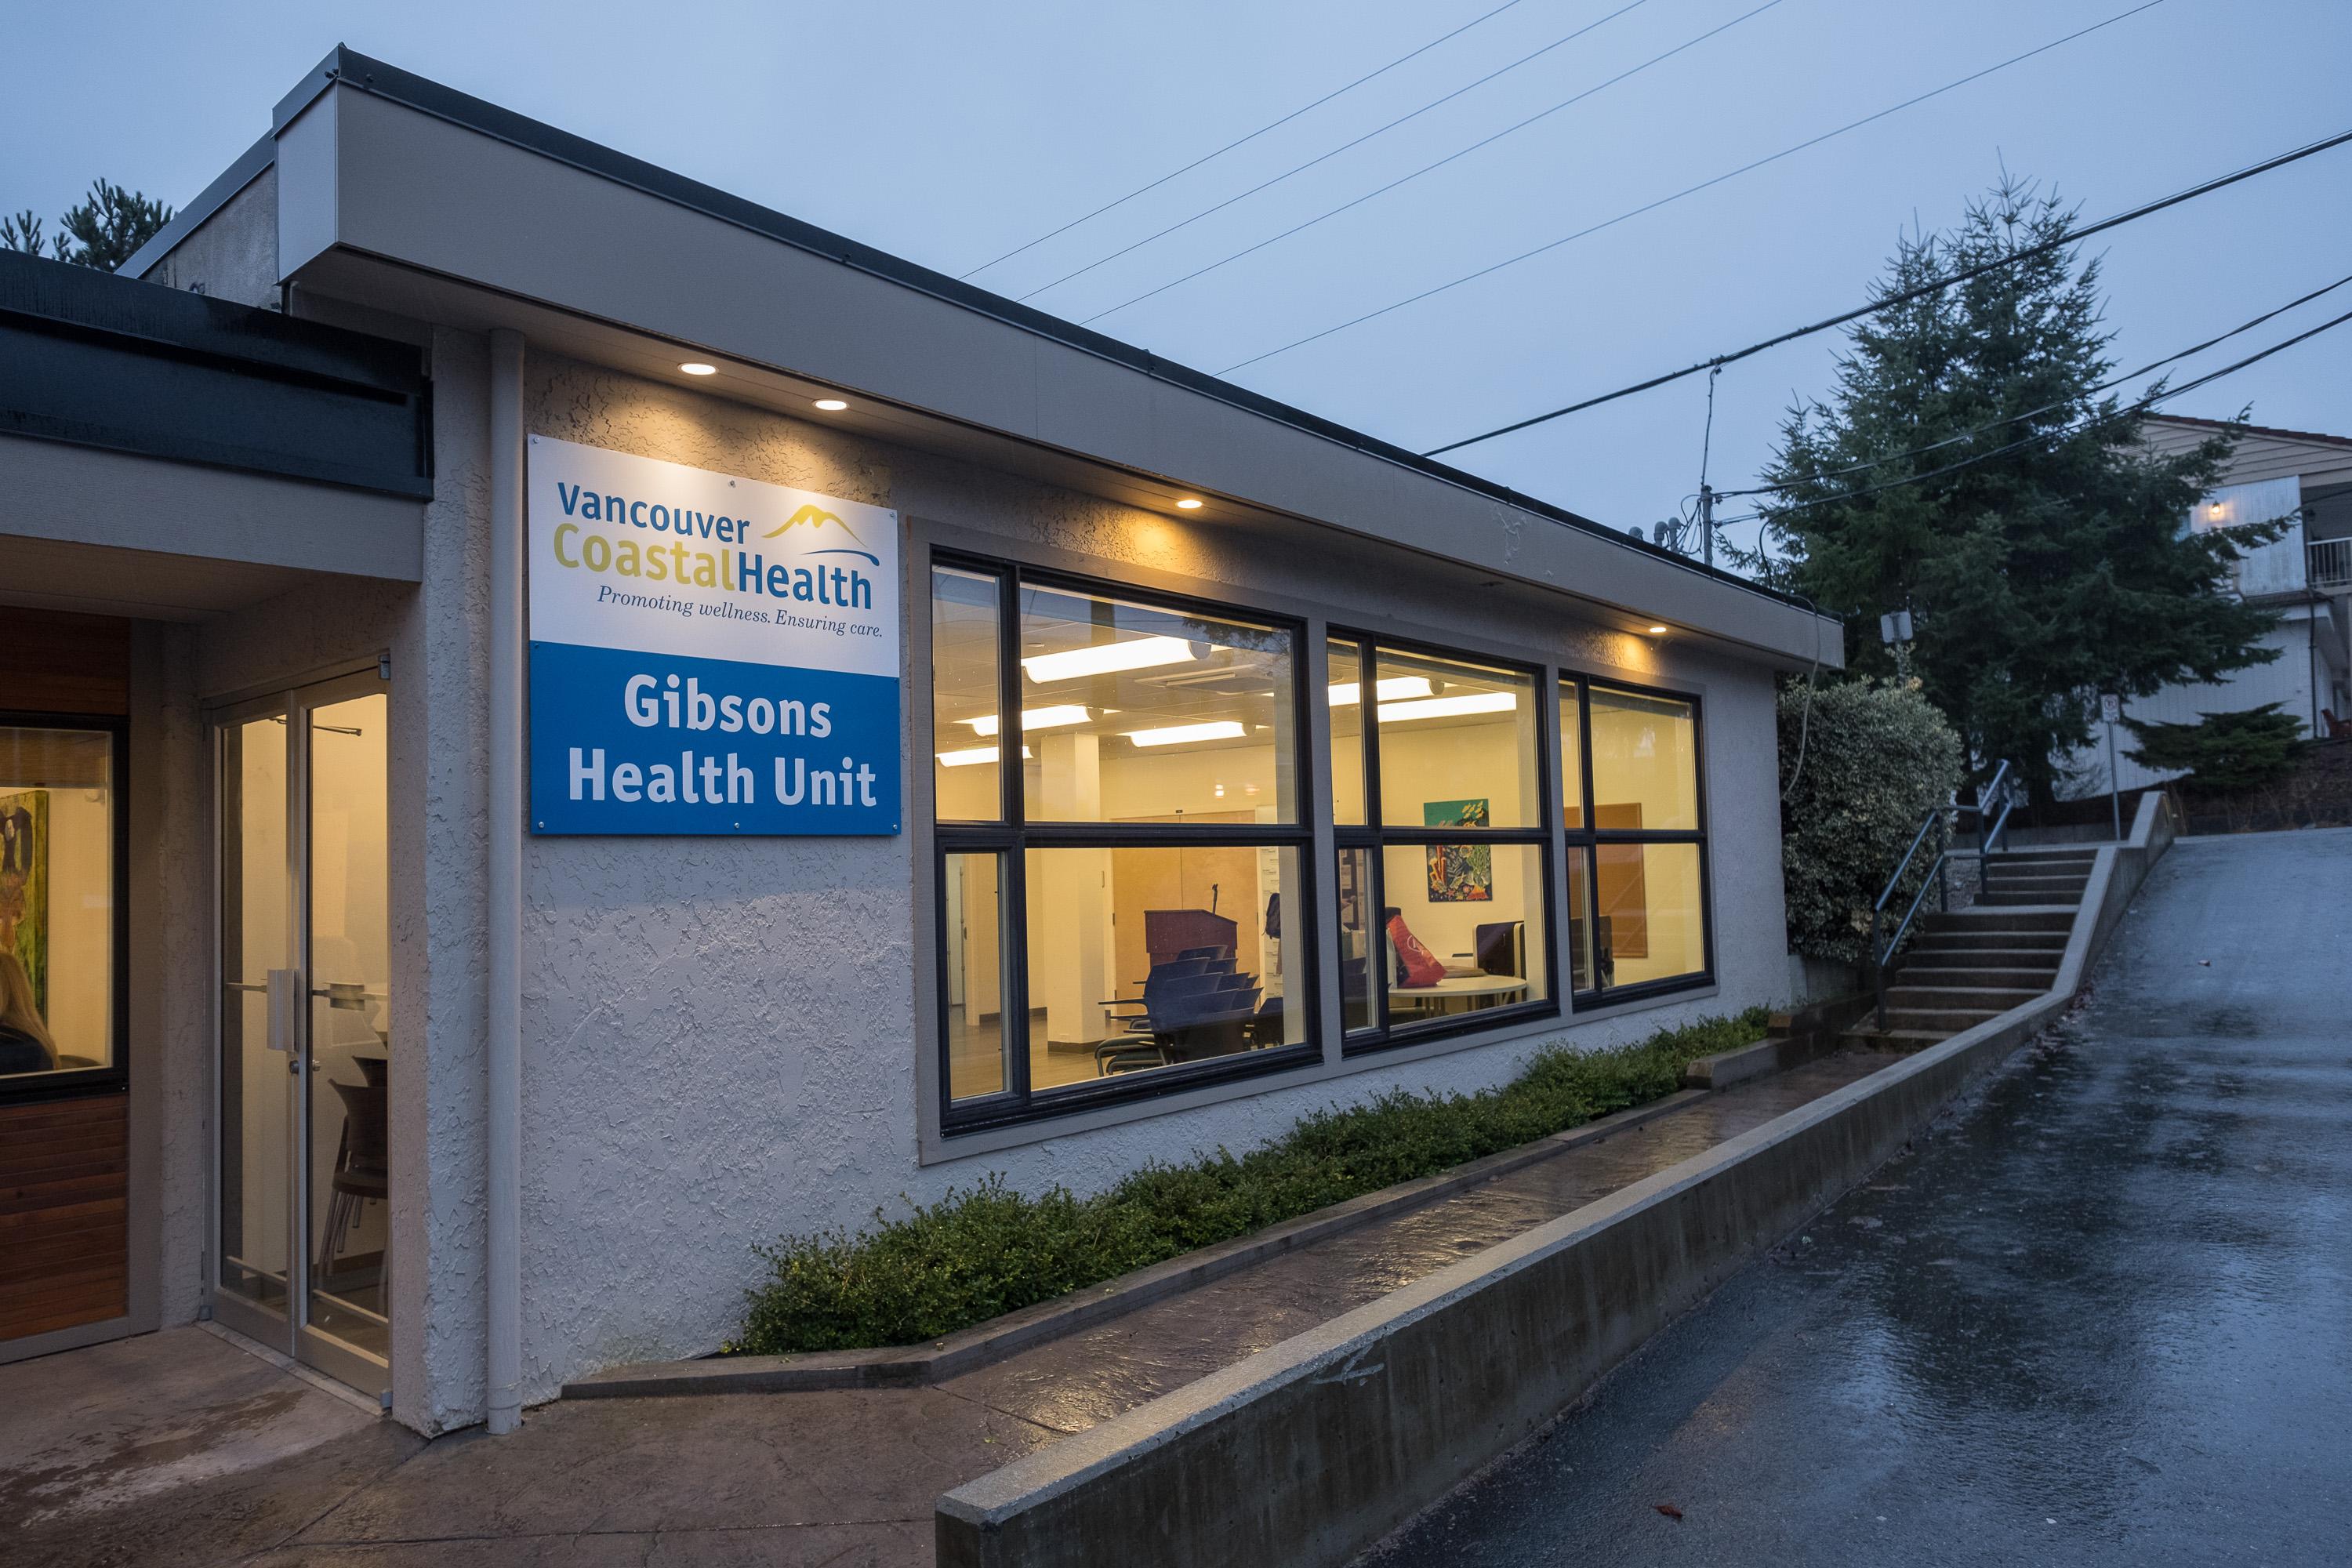 Sechelt and Gibsons Health Units